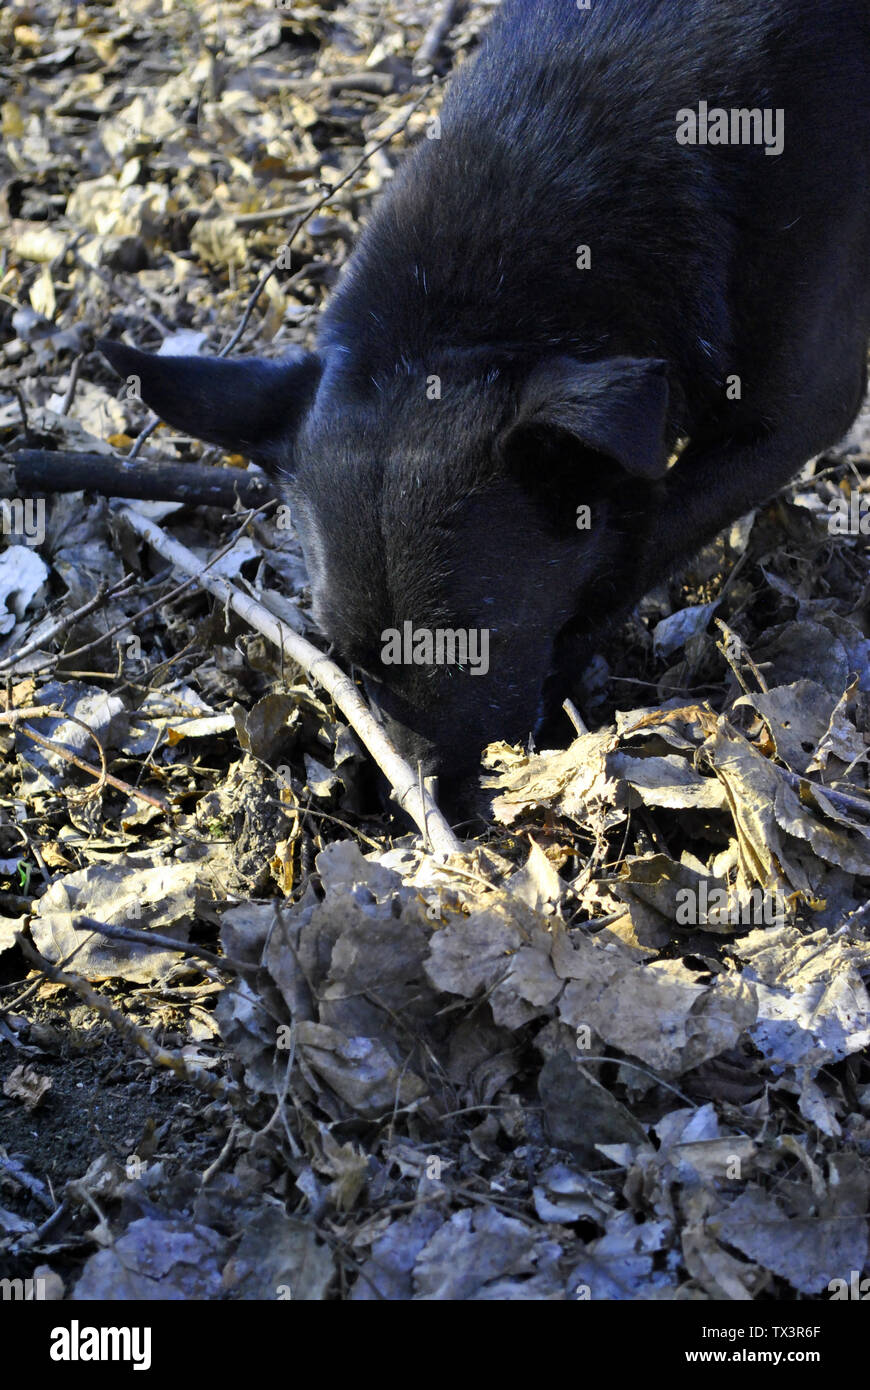 Black cur funny dog sniffing on the blurry soft background of gray-brown dry leaves, muzzle close up detail Stock Photo